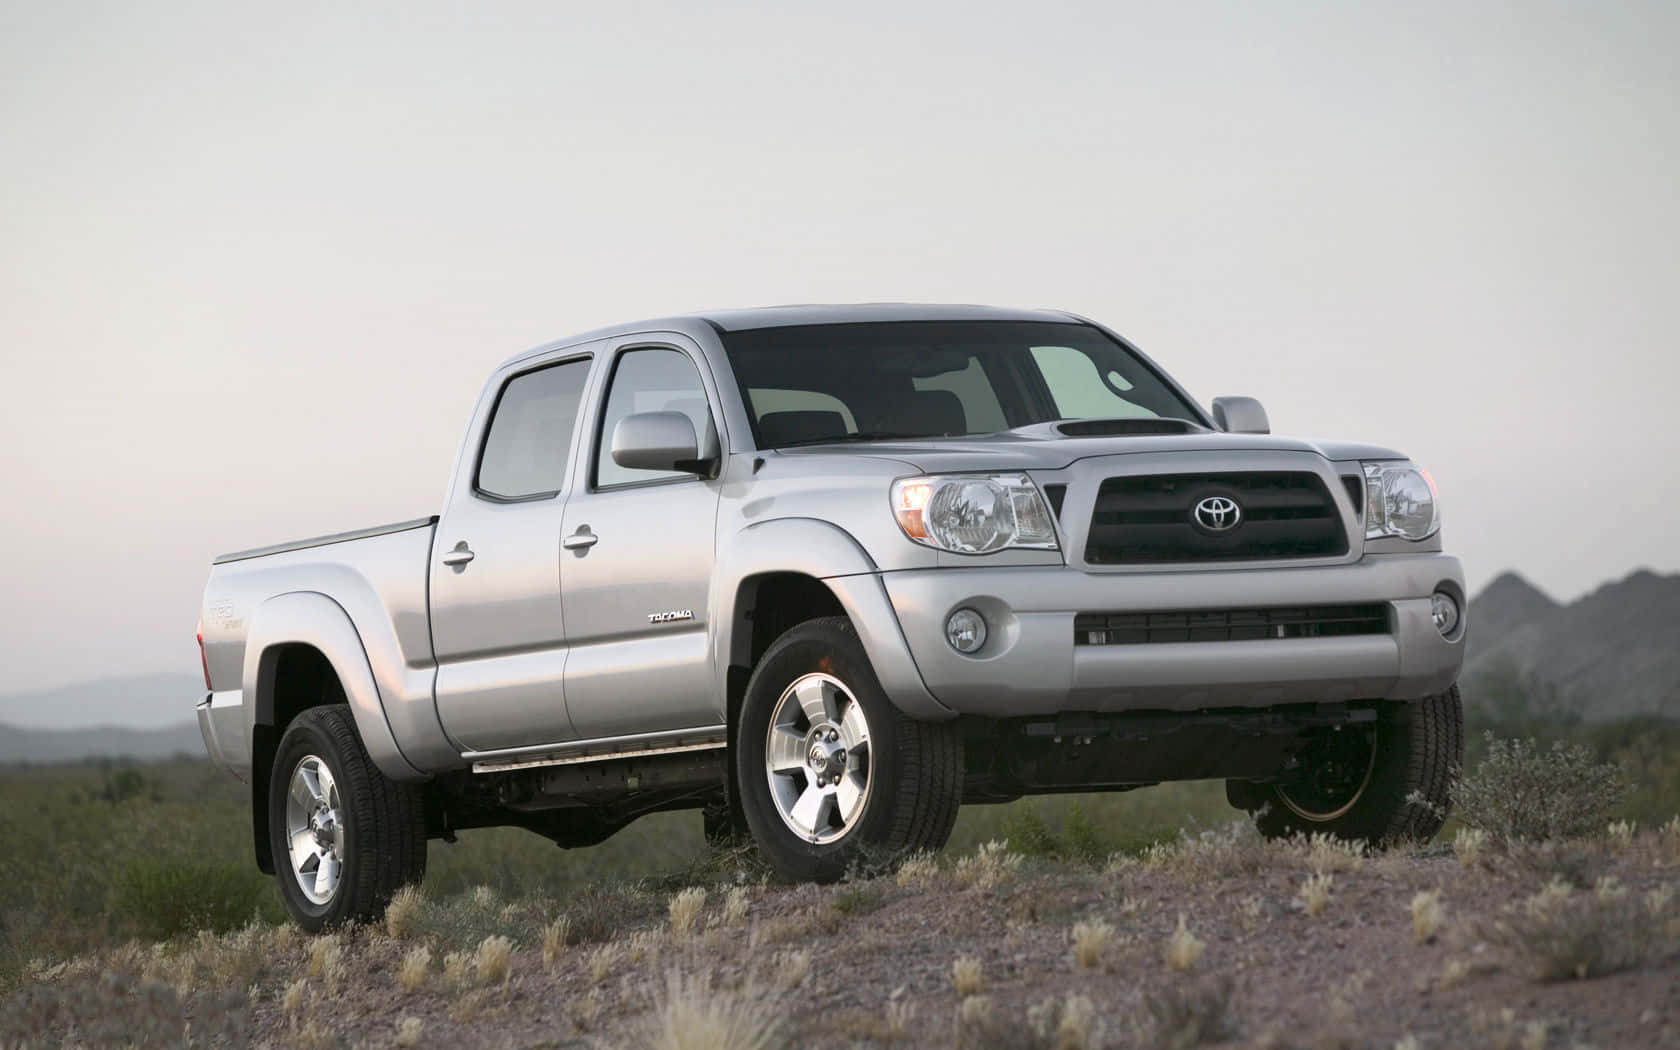 Majestic Silver Toyota Tacoma Dominating The Off-road Wallpaper